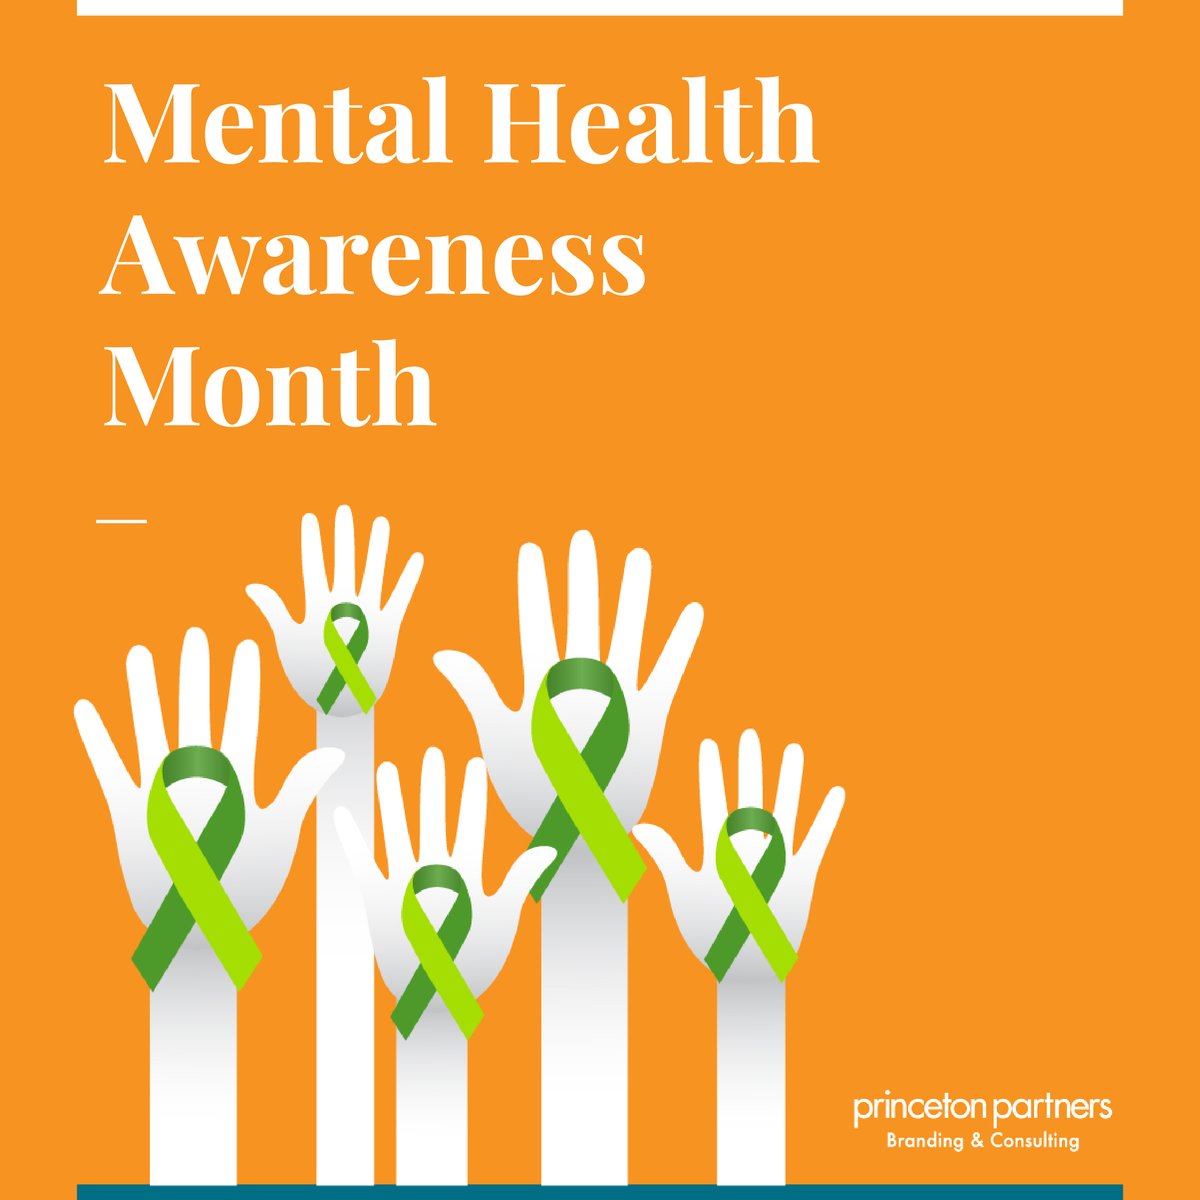 May is Mental Health Awareness Month. Let’s break the stigma surrounding mental illness, which can prevent individuals from getting the support they need. Prioritize mental health today. #MentalHealthAwareness #SelfCare #Tools2Thrive #ConnectWithYourPeers #LookAroundLookWithin